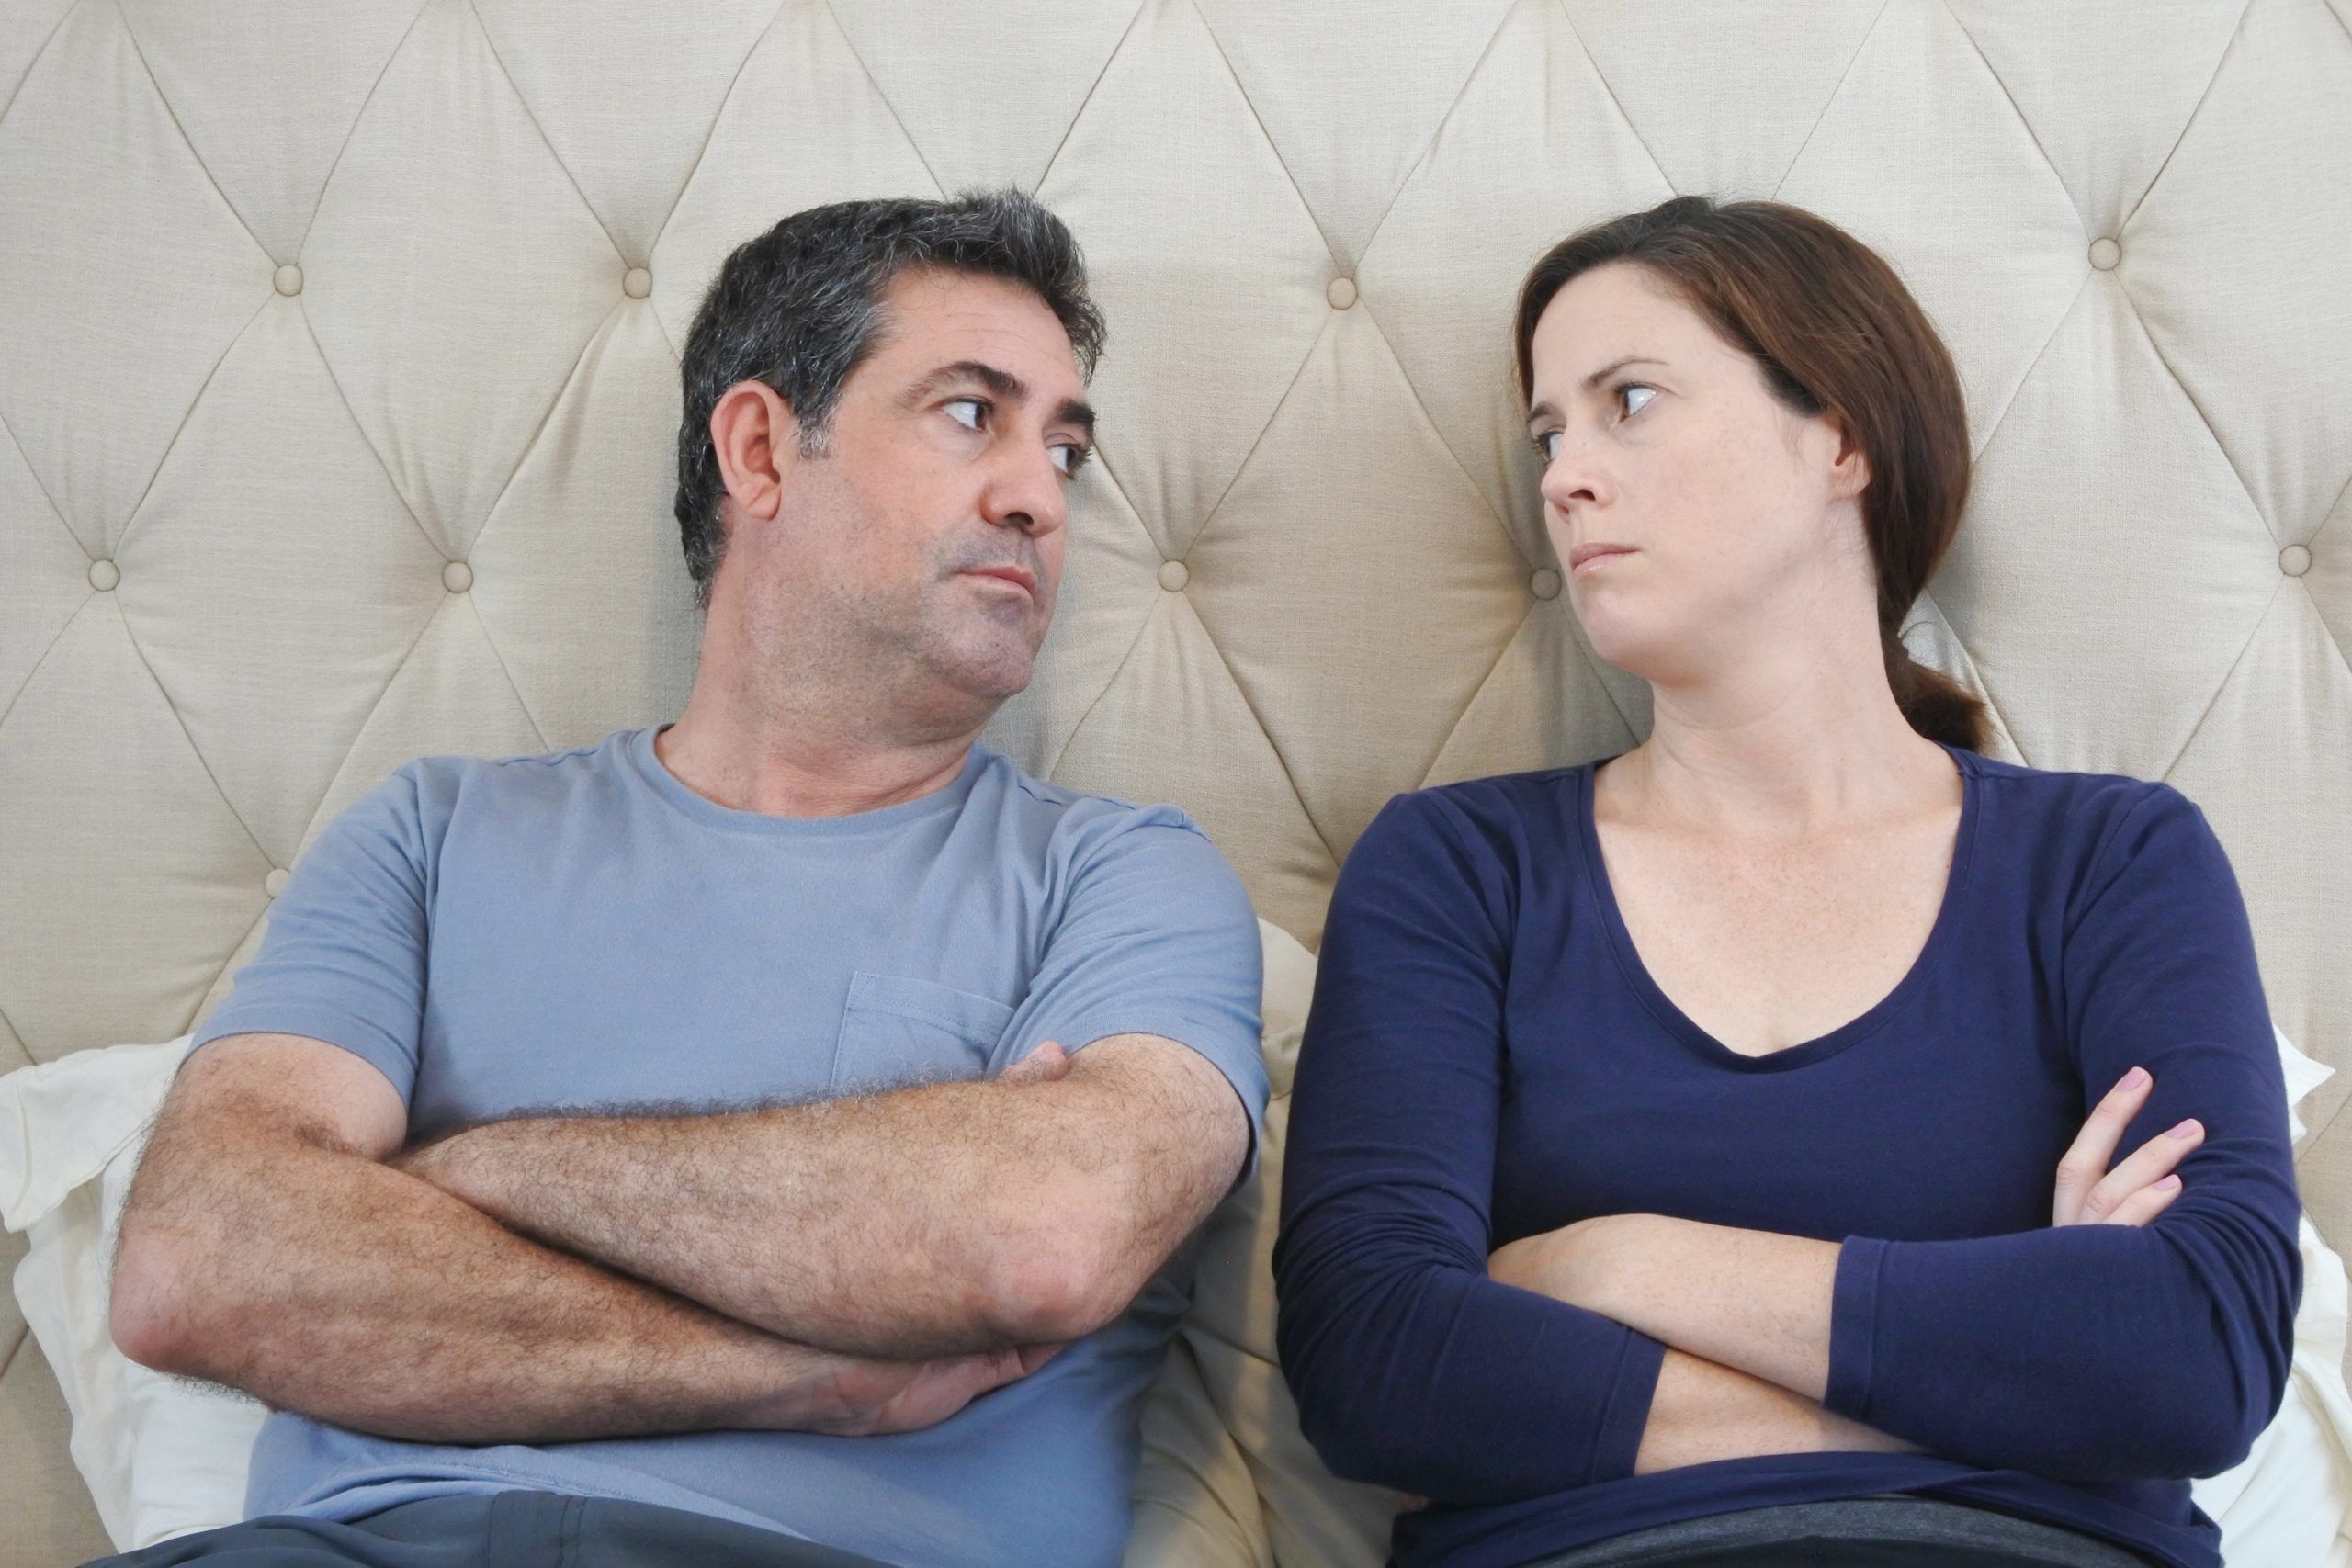 A new study looked at how divorce can have an impact on both physical and mental health.